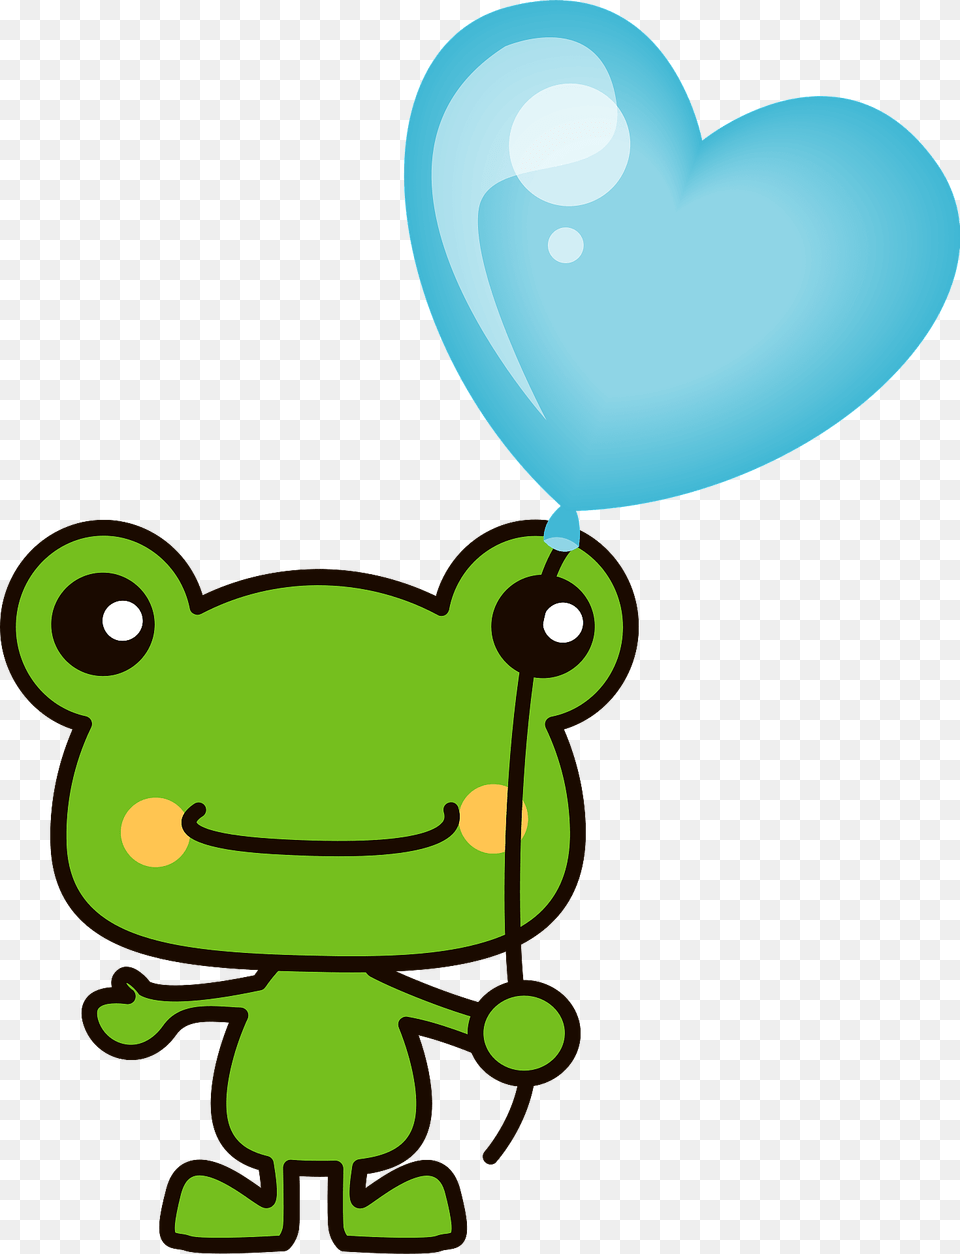 Frog Is Holding A Heart Balloon Clipart Png